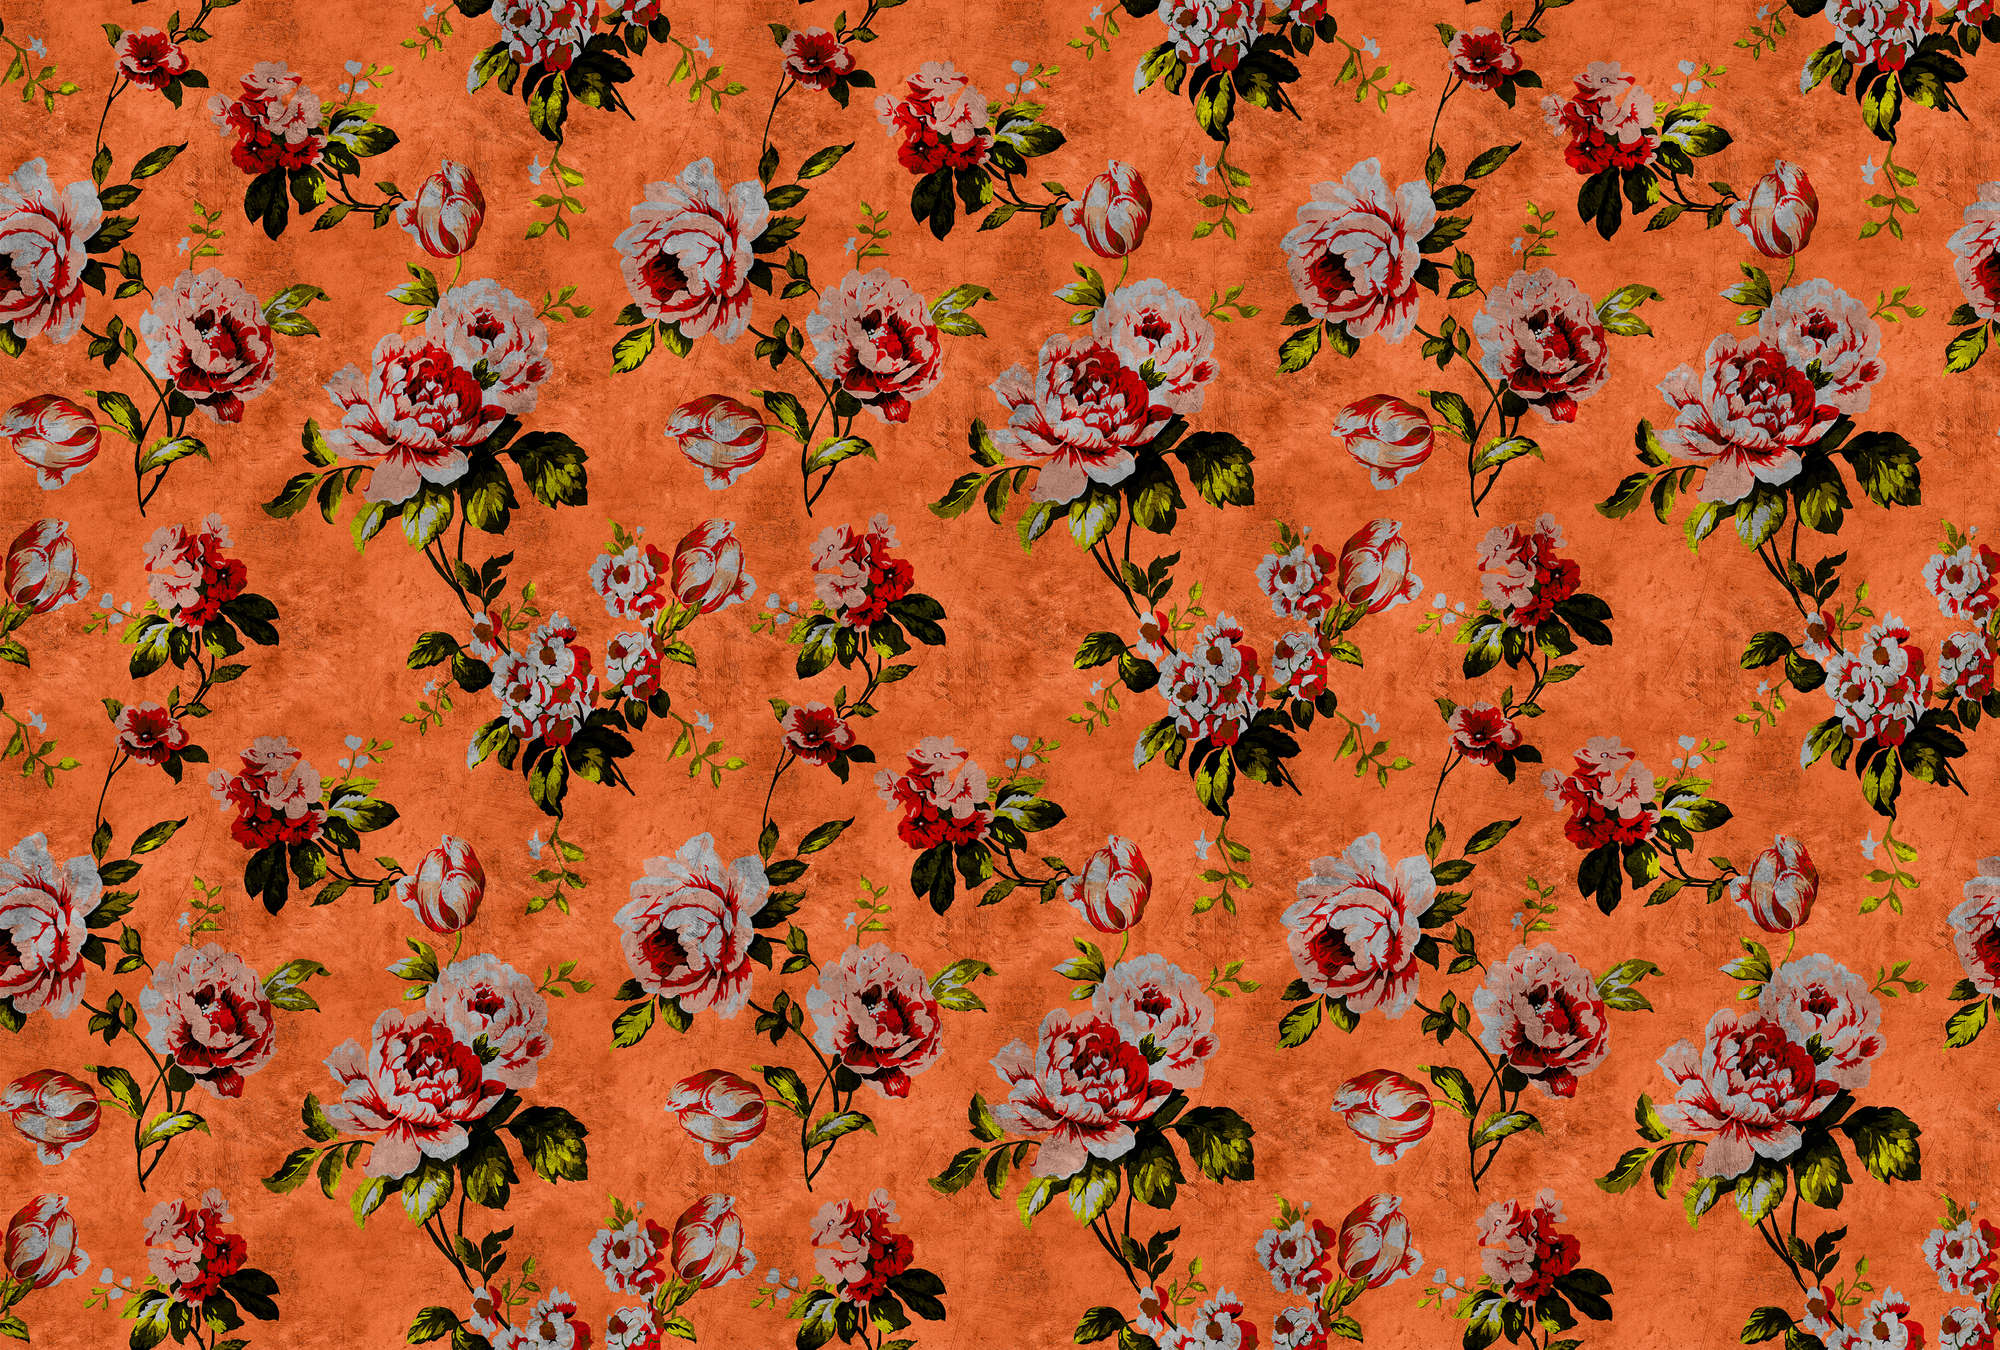             Wild roses 2 - Roses photo wallpaper in scratchy structure in retro look, orange - yellow, orange | mother-of-pearl smooth fleece
        